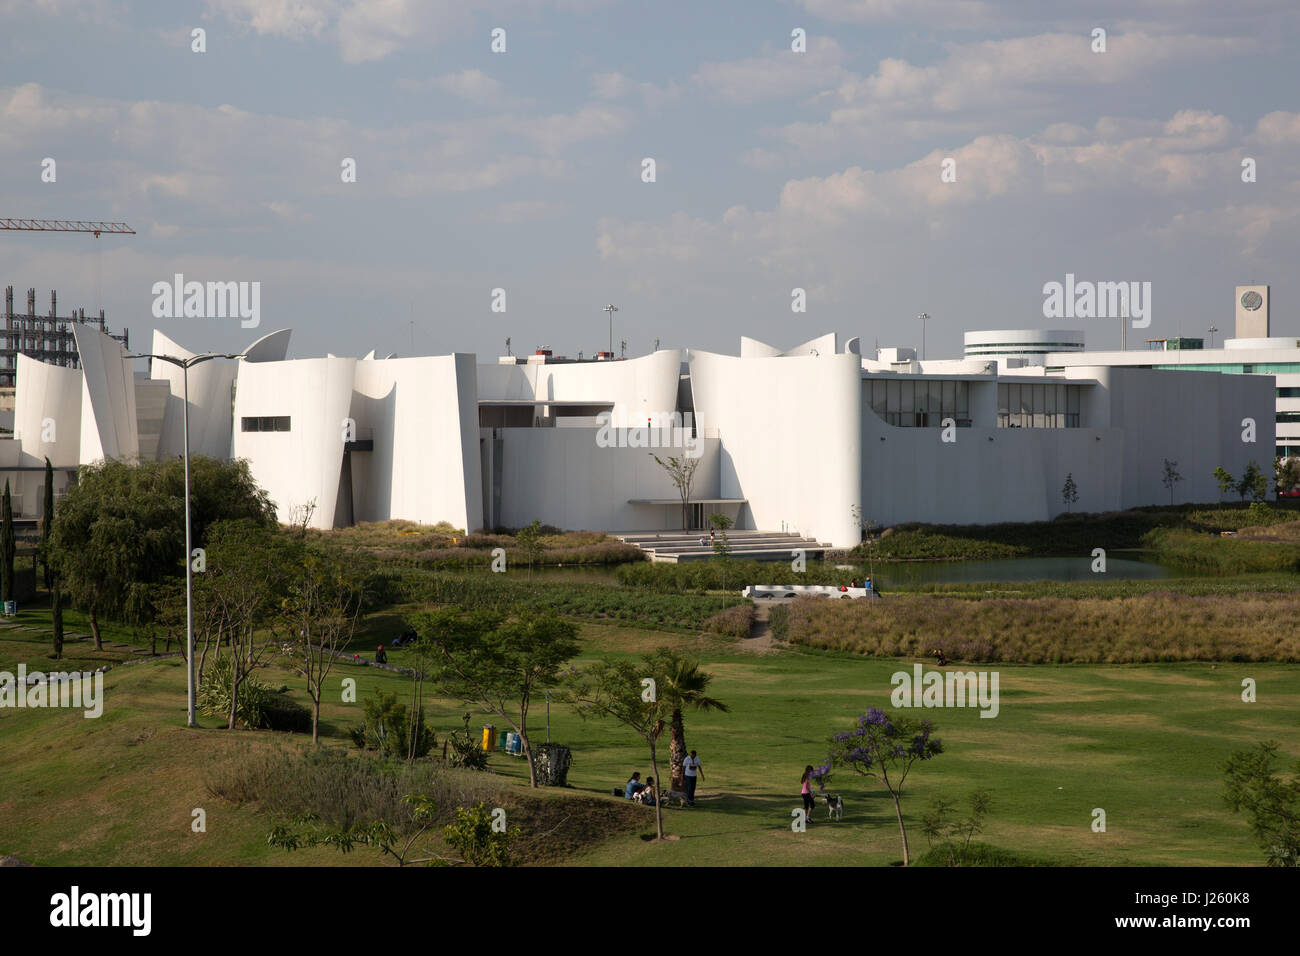 The International Museum of the Baroque (Museo Internacional del Barroco in Spanish) in Puebla, Mexico on April 22, 2017. The Museum is dedicated to b Stock Photo